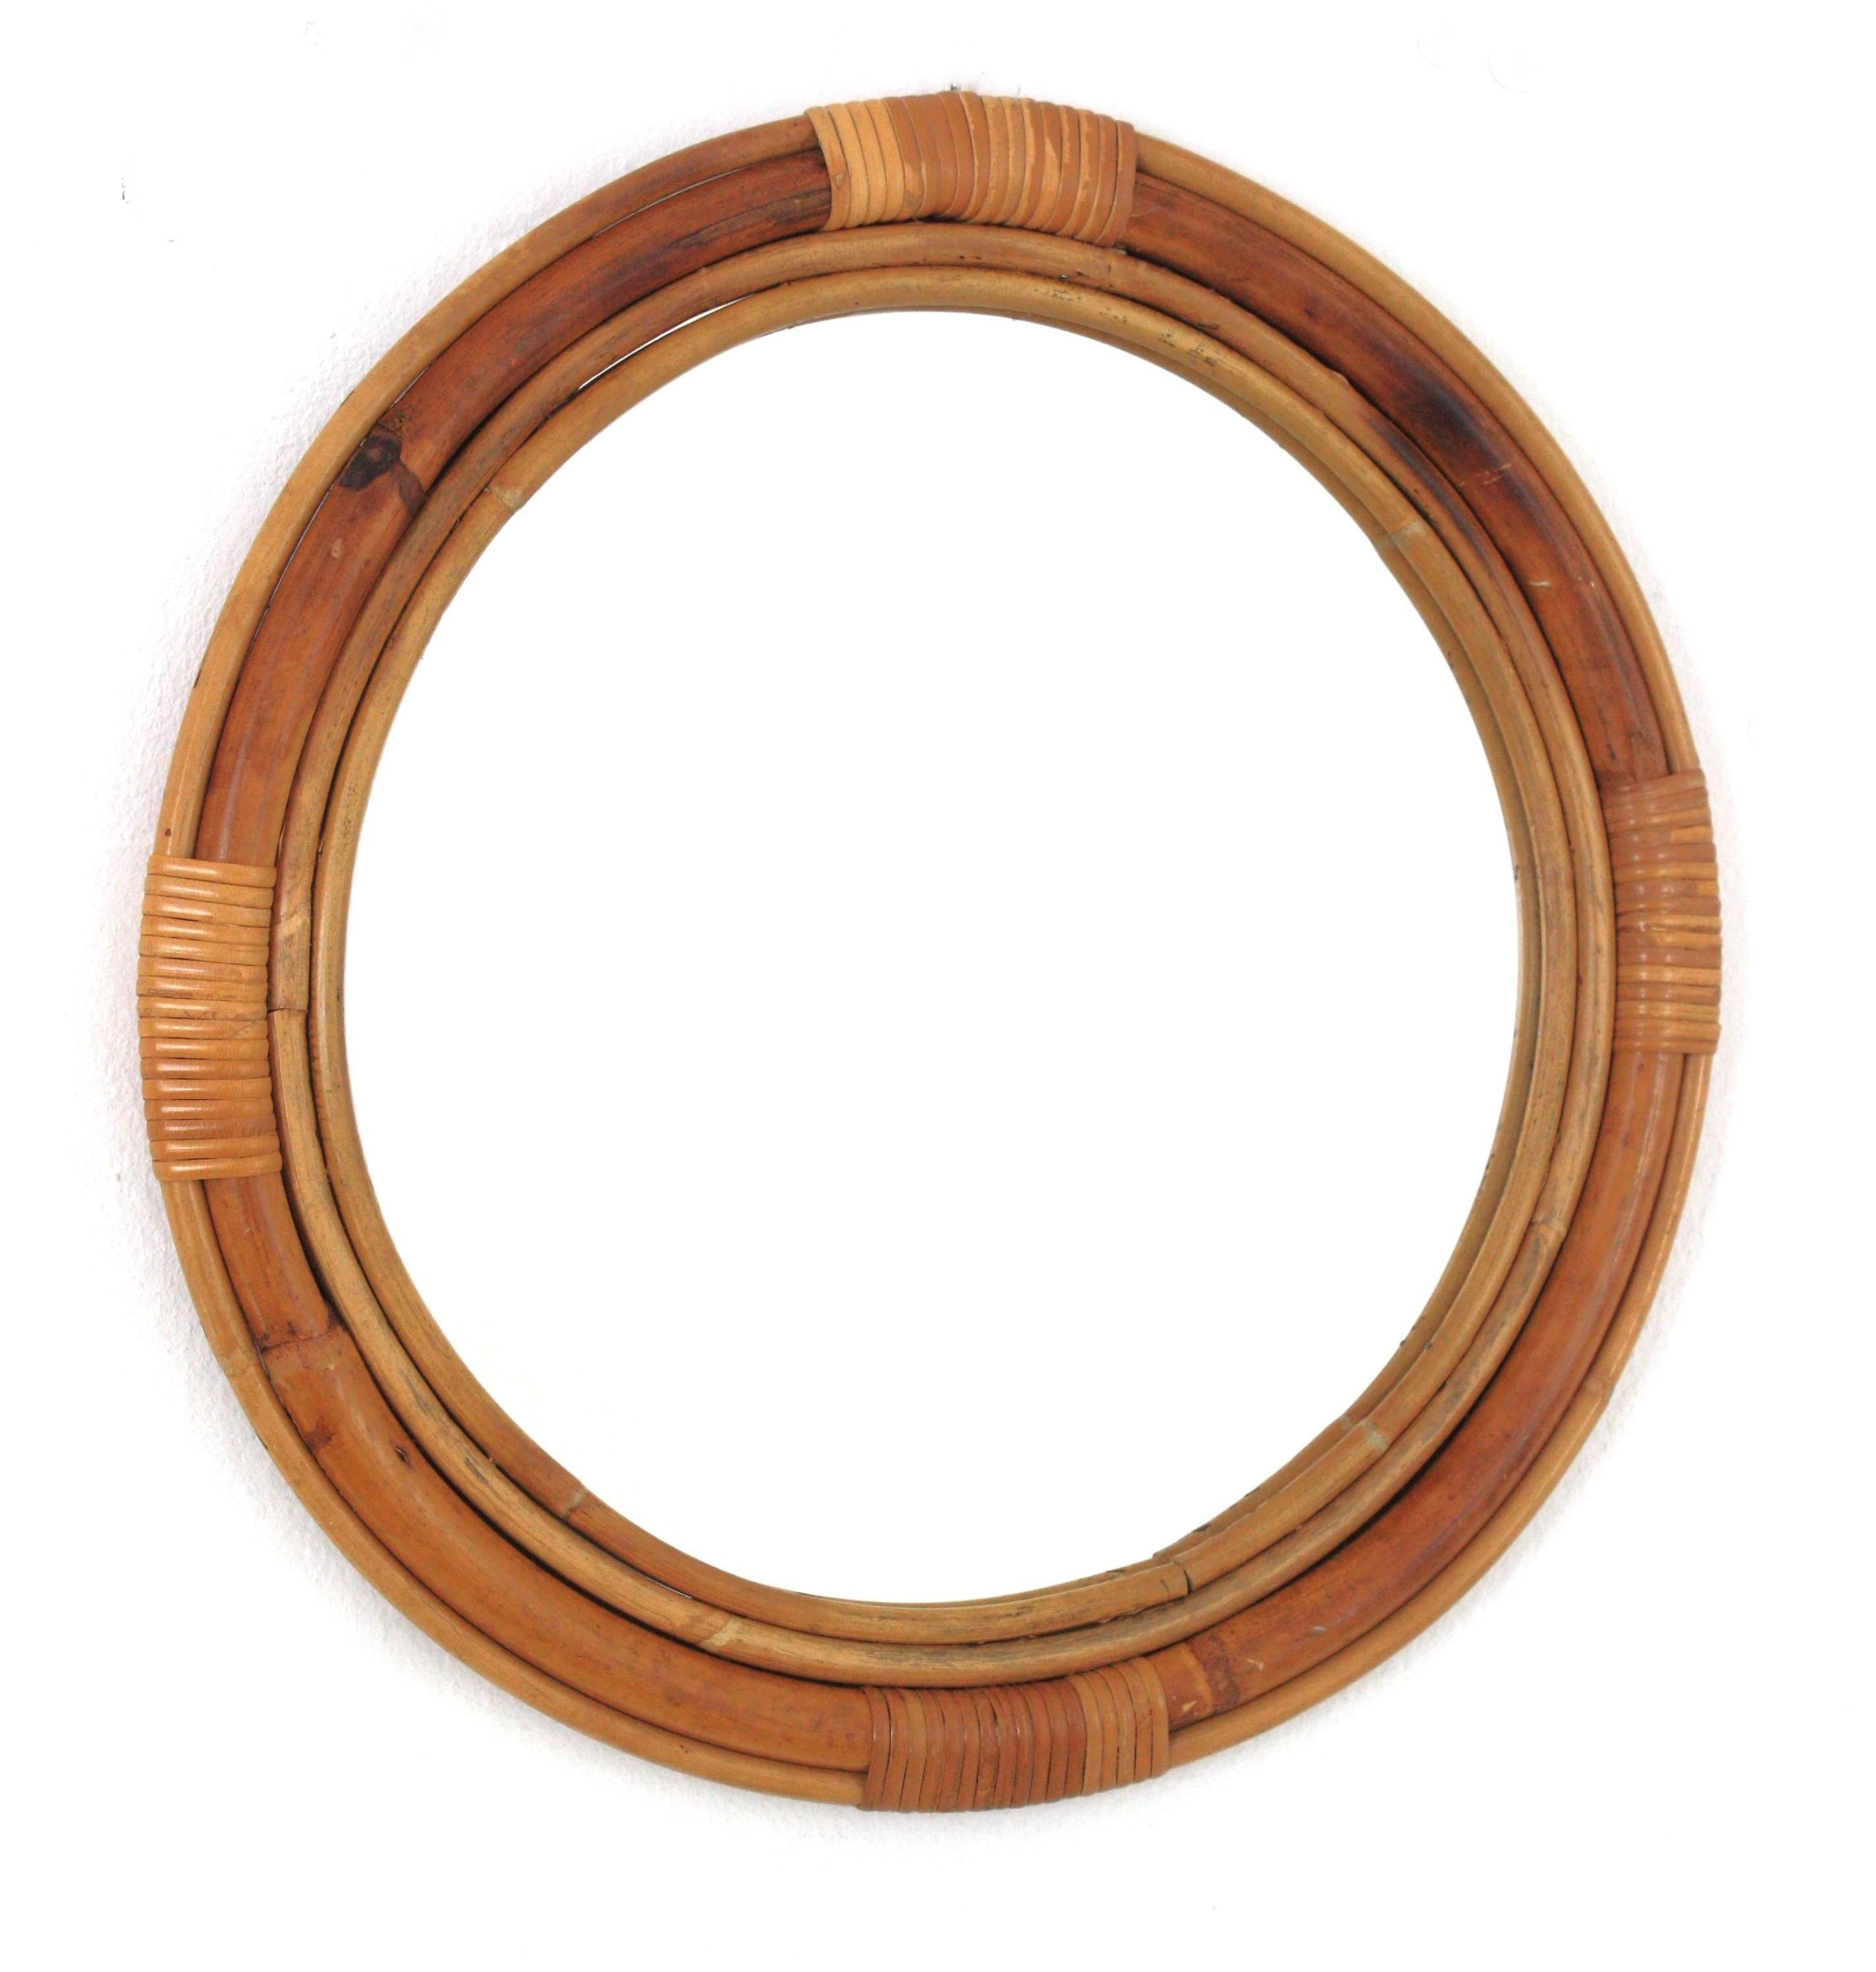 Eye-catching Mid-Century Modern round bamboo rattan wall mirror, Spain, 1950s-1960s
Wrapped tied wicker details on the top, bottom and both sidez.
This mirror has reminiscences of Paul Frankl designs.
Concentric tiers of rattan and bamboo canes with